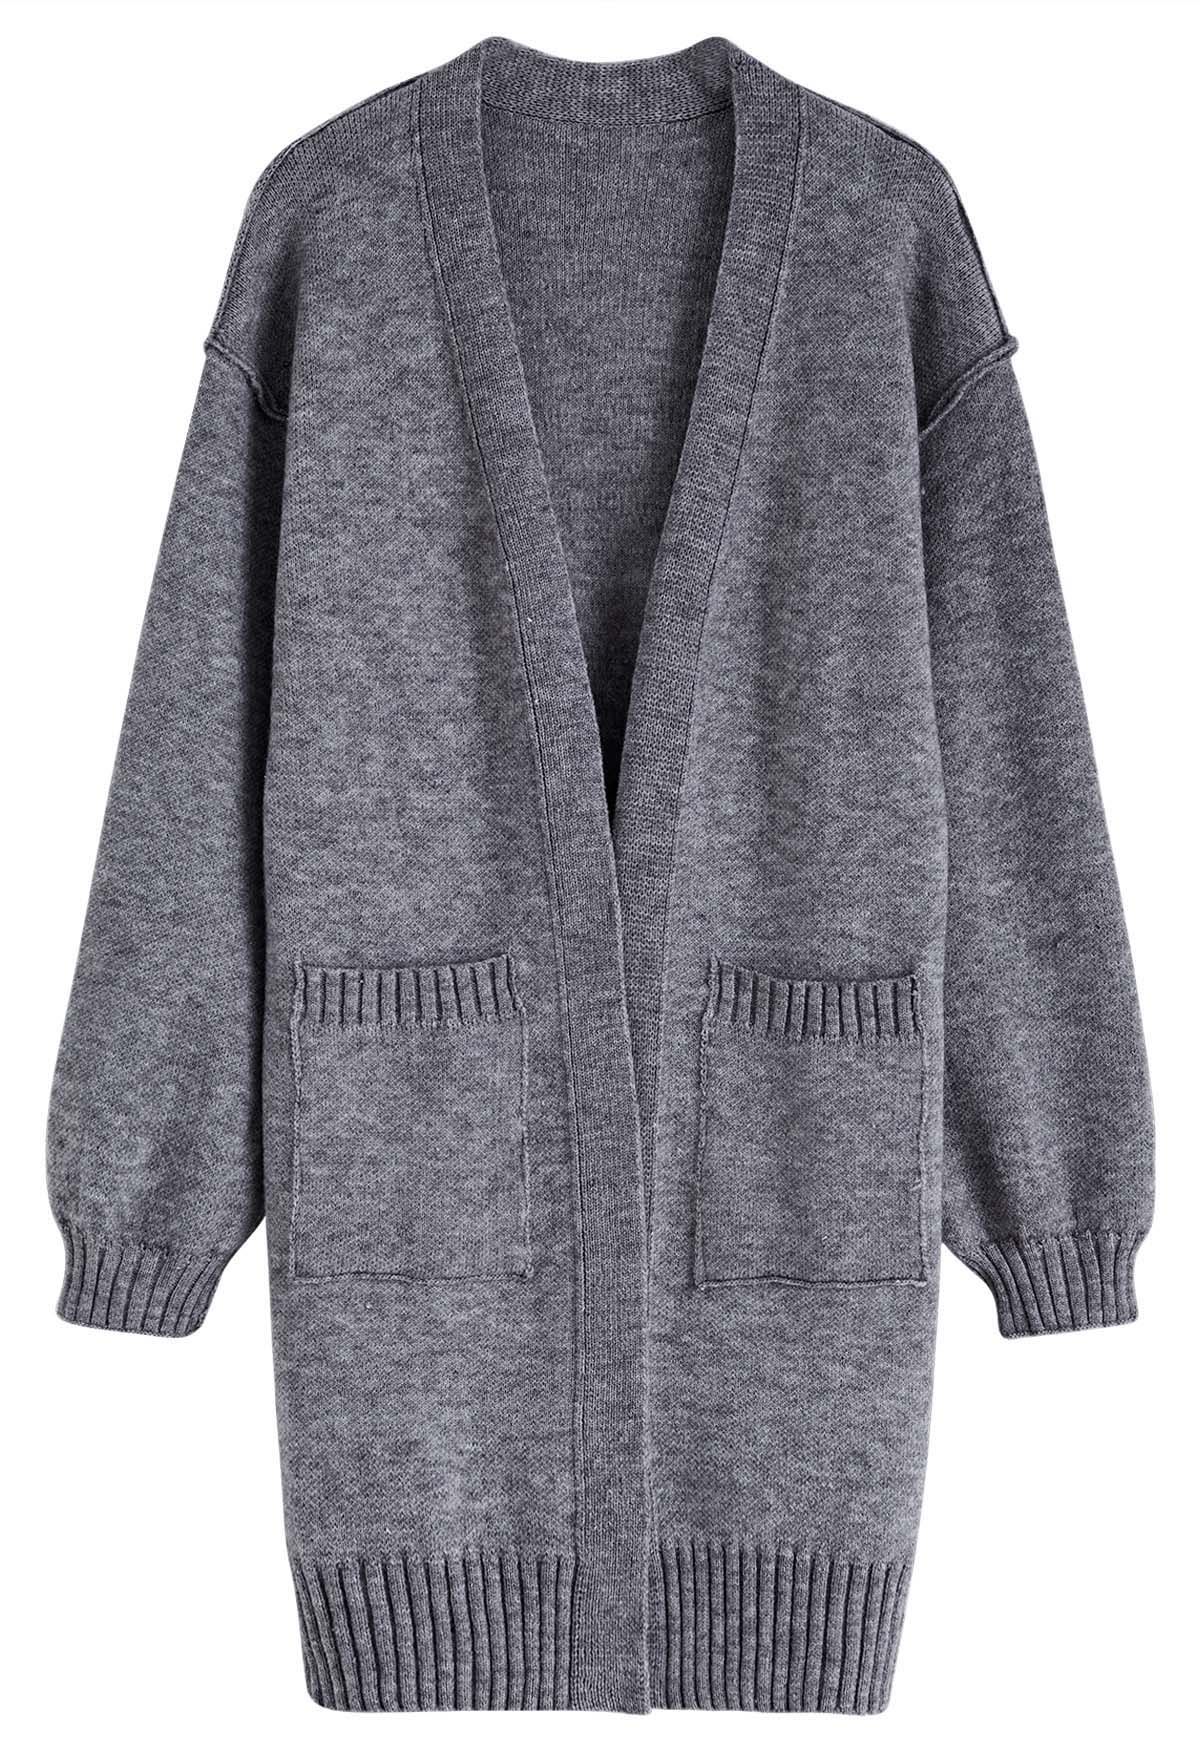 Casual Open Front Oversized Knit Cardigan with Pockets in Grey